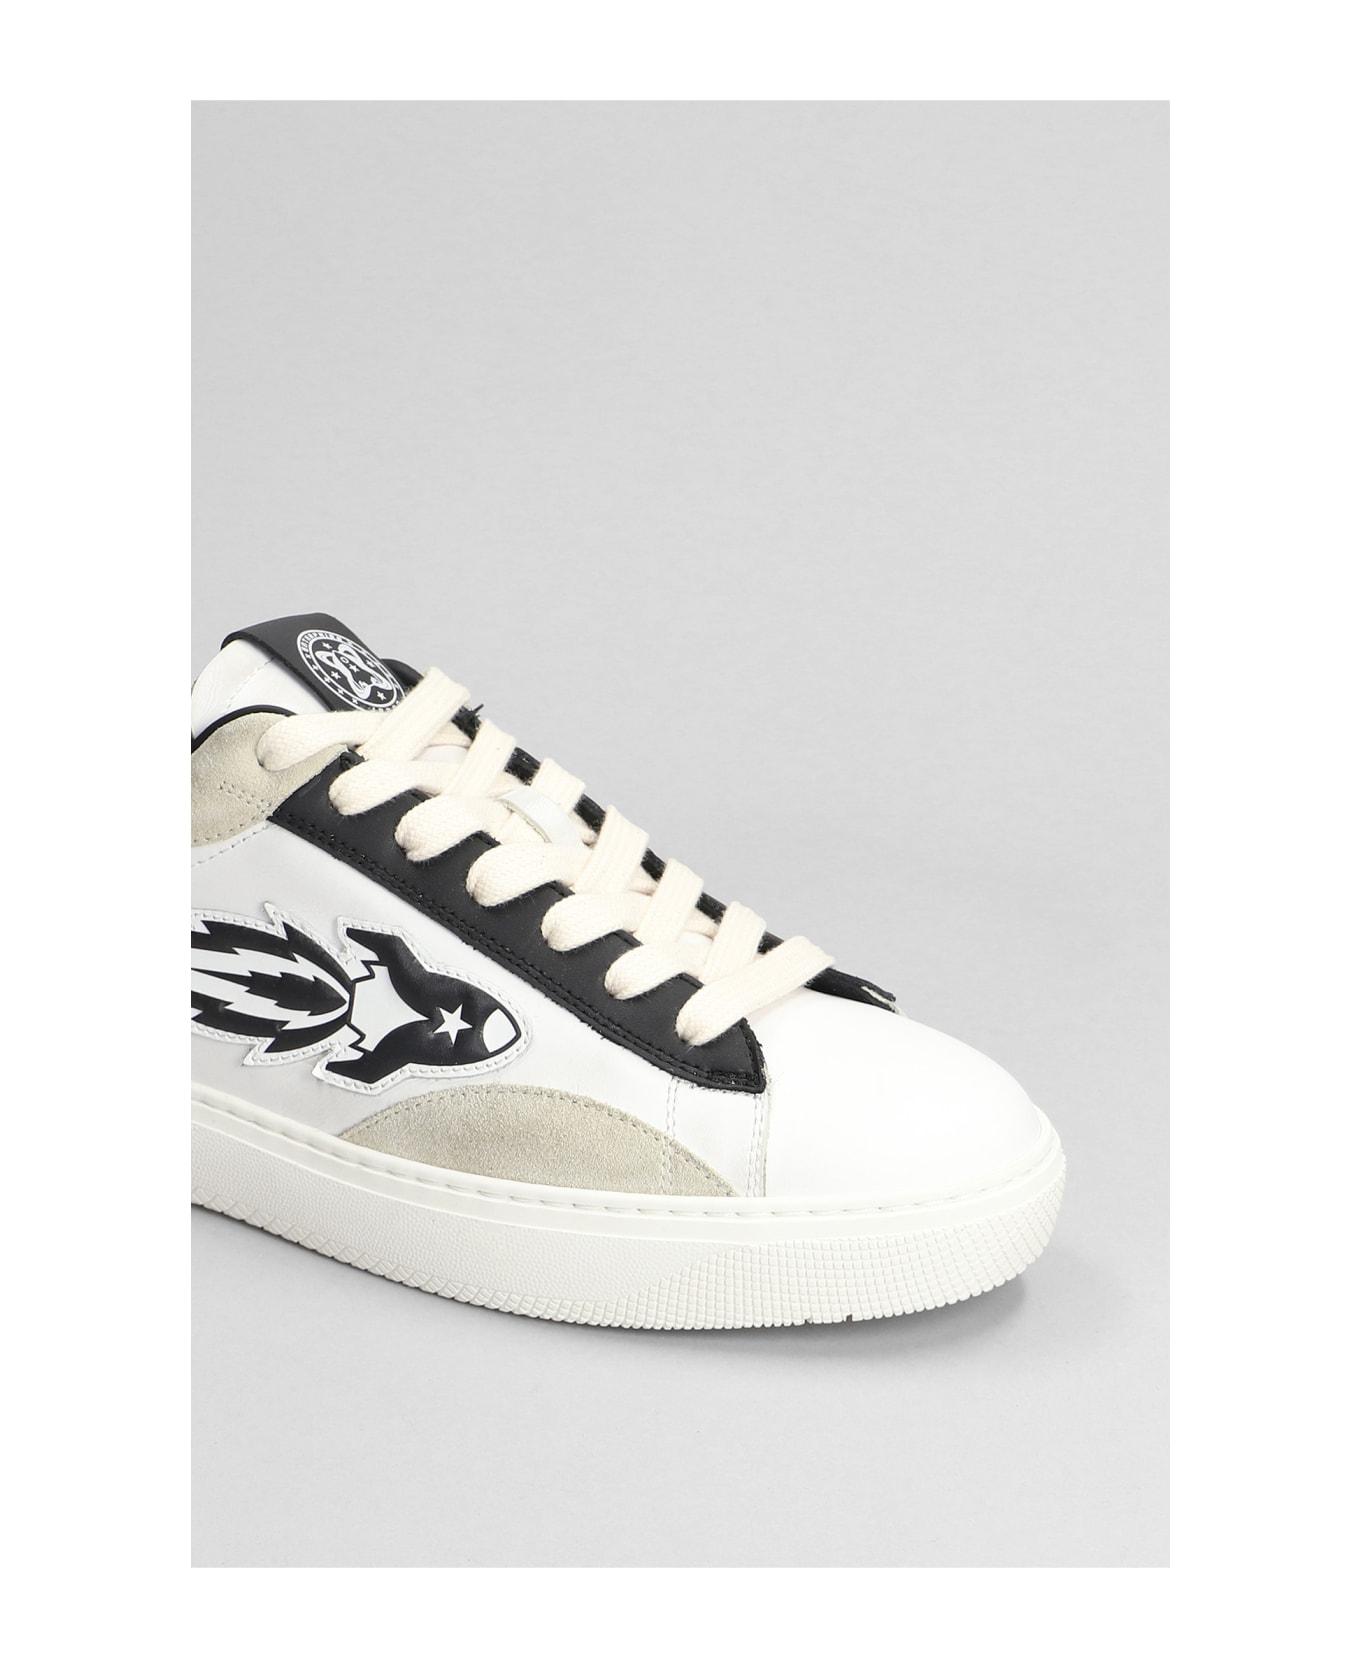 Enterprise Japan Sneakers In White Suede And Leather - White and black